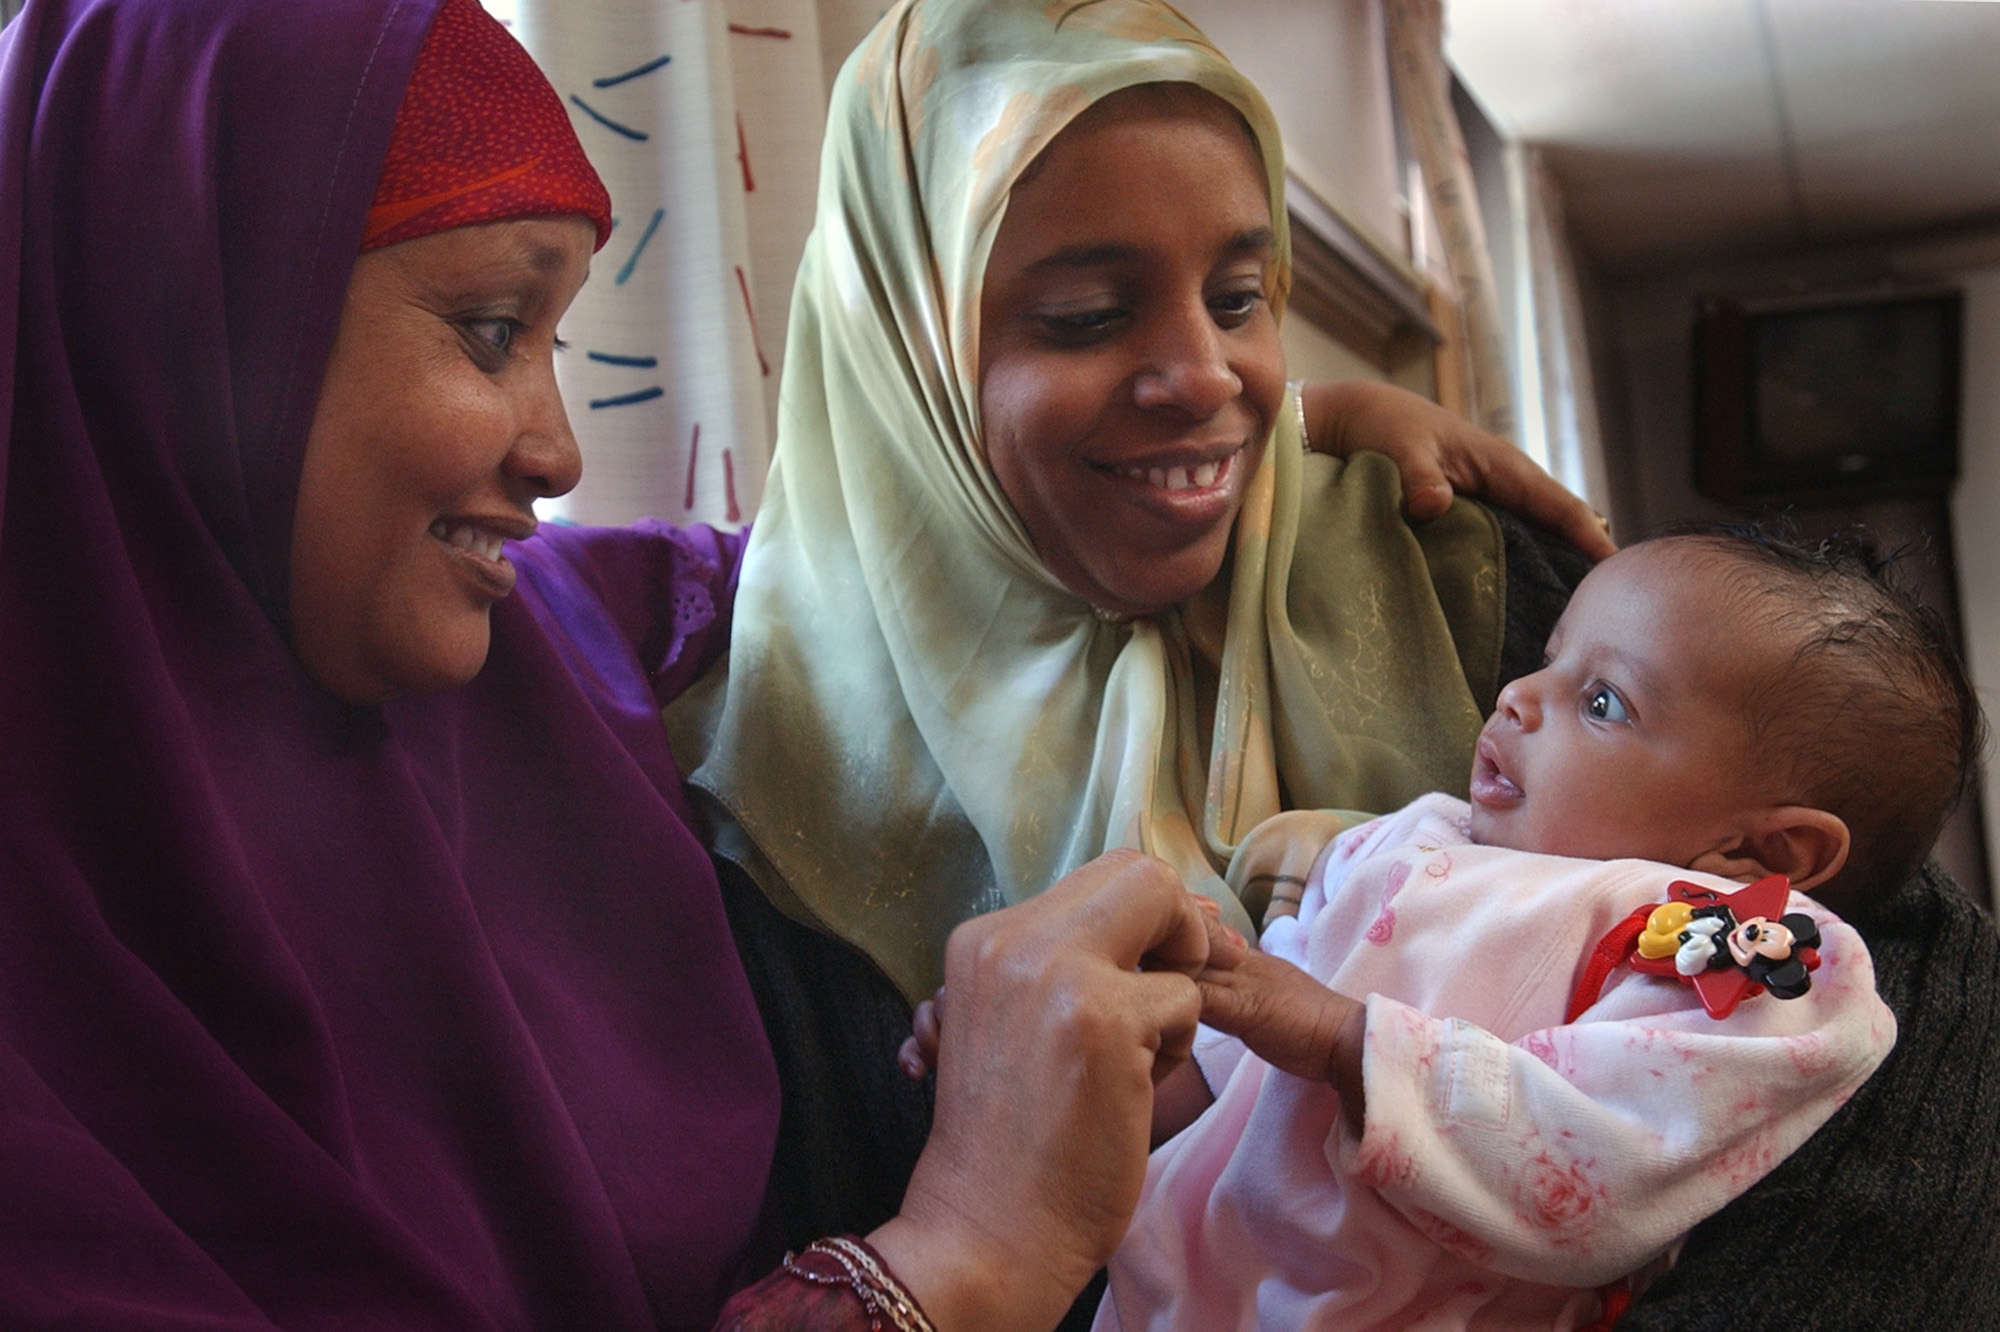 Joey McLeister/Star Tribune Minneapolis,Mn.,Thurs.,April 22, 2004--(Left to right) Hawa Ade was Muna Said Mohamed's doula for the birth of her eighth baby, two-month-old Mariam Mohamed at Fairview University Hospital.  Ade is a doula at Hennepin County Medical Center, too.  Mohamed said she was grateful for the massages from Ade which eased the pain of labor. GENERAL INFORMATION: At Fairview University Hospital, Somali women are helped by Somali doulas before and during birth. (Photo by JOEY MCLEISTER/Star Tribune via Getty Images) (A doula sits with a mother and her 2-month-old baby at a hospital in Minneapolis, April 2004.)